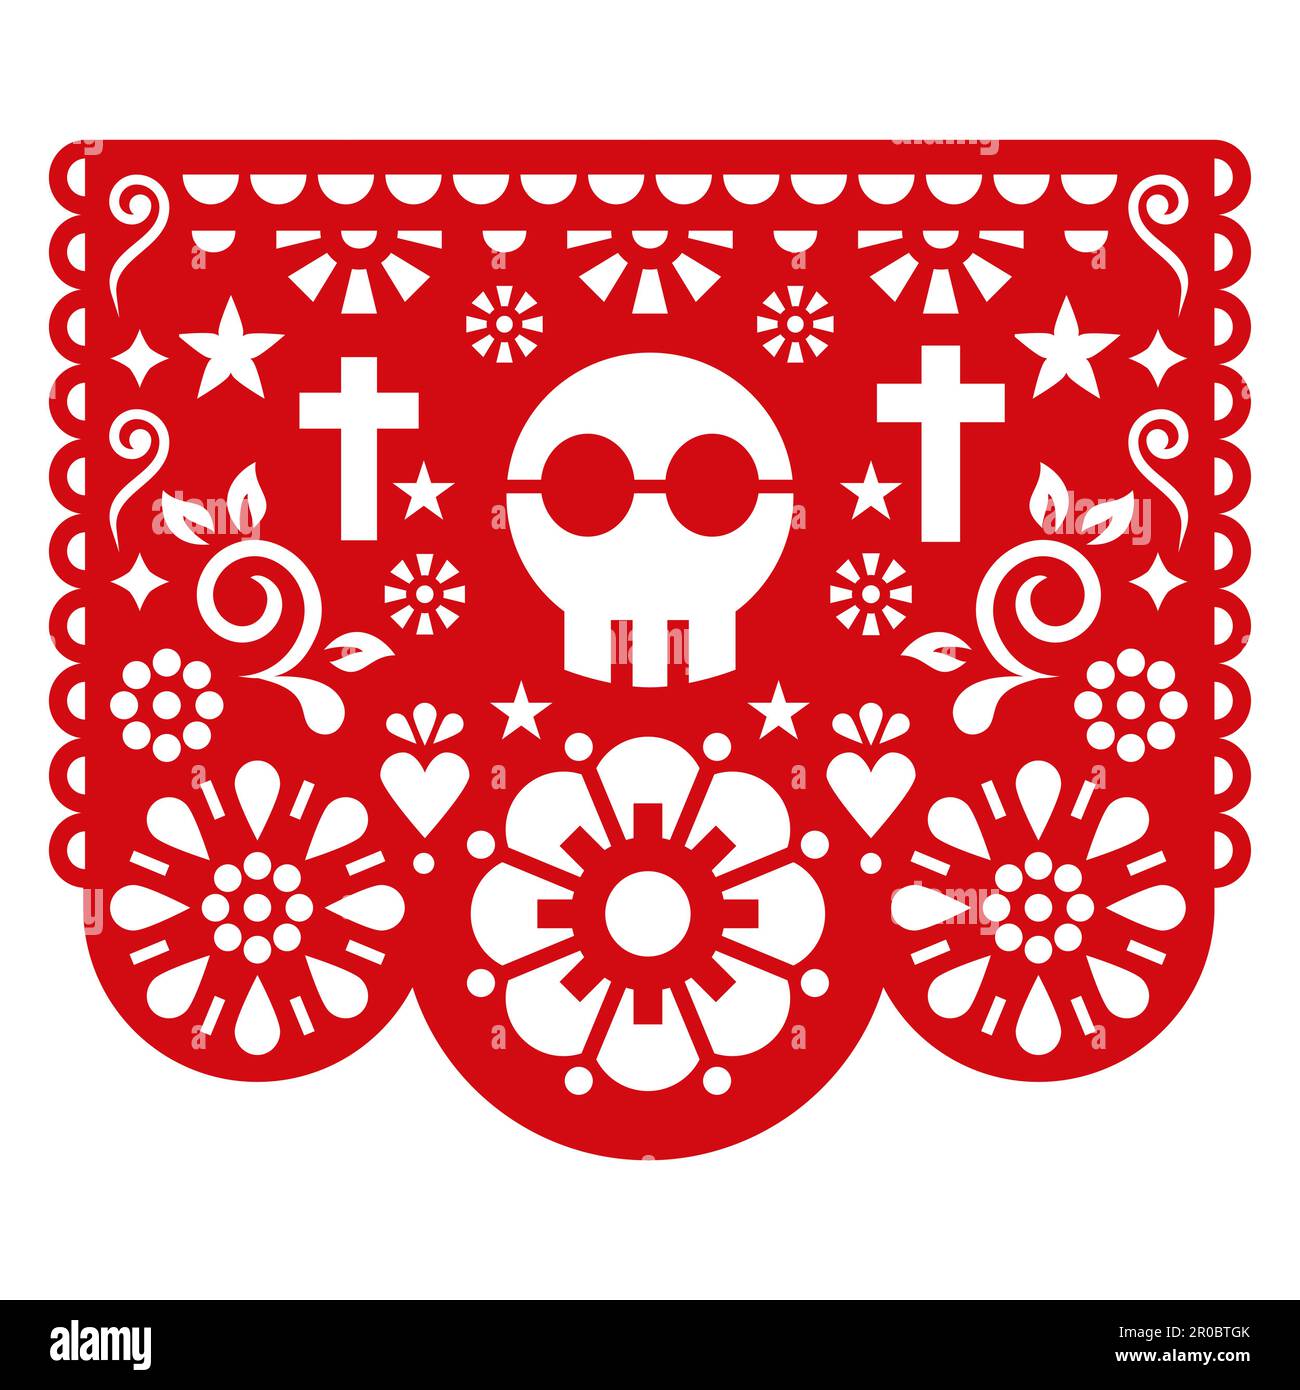 Halloween Papel Picado vector design with skull, flowers and crosses, Mexican paper cutout decoration - party garland Stock Vector